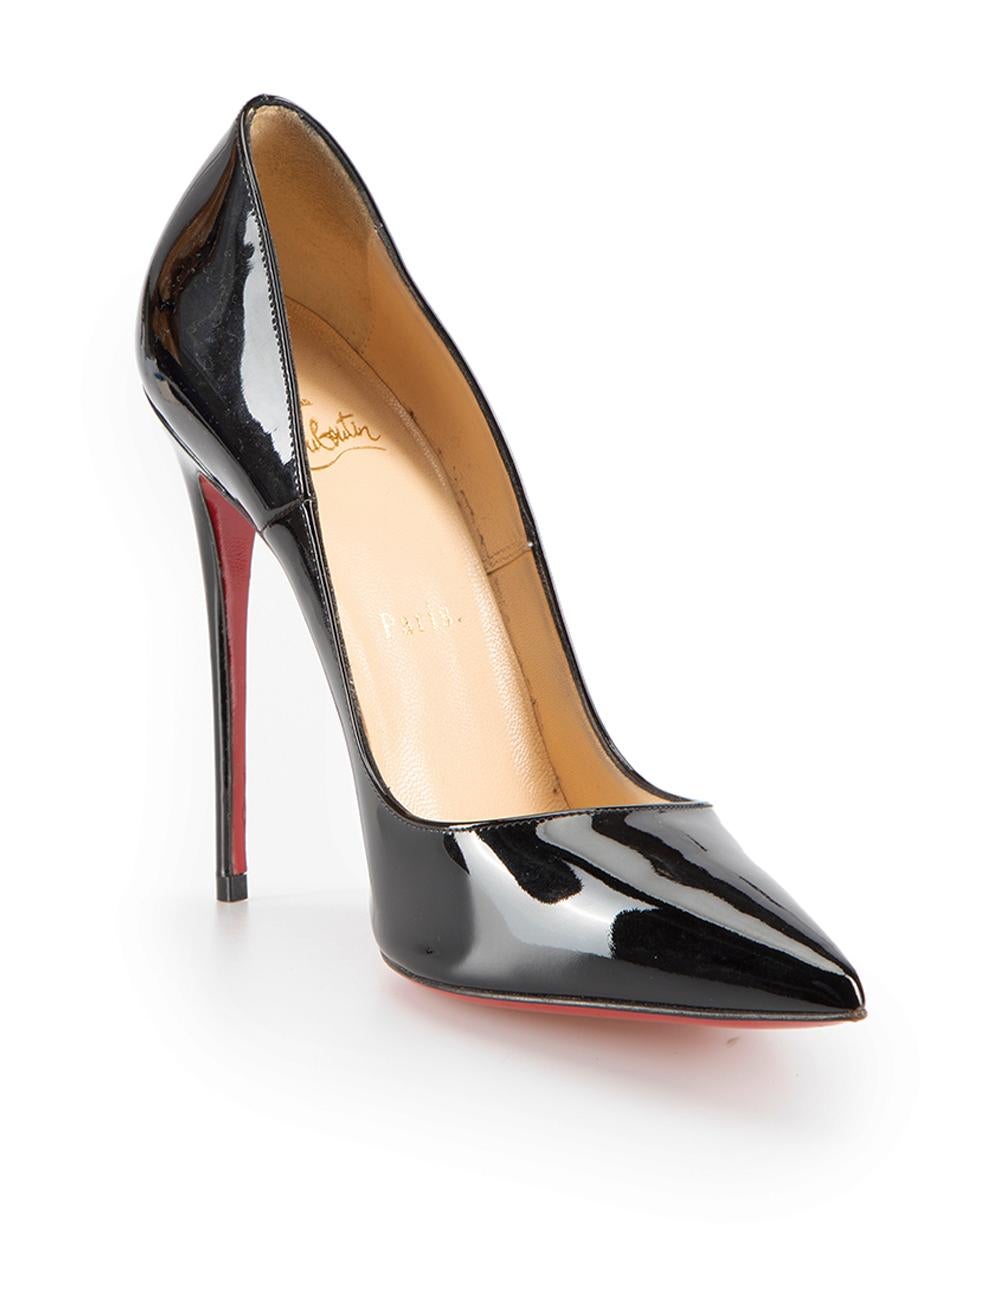 CONDITION is Very good. Hardly any visible wear to shoes is evident on this used Christian Louboutin designer resale item.
  
Details
Black
Patent leather
Pumps
Slip on
Point toe
High heeled
Signature used Christian Louboutin red outsoles
Leather